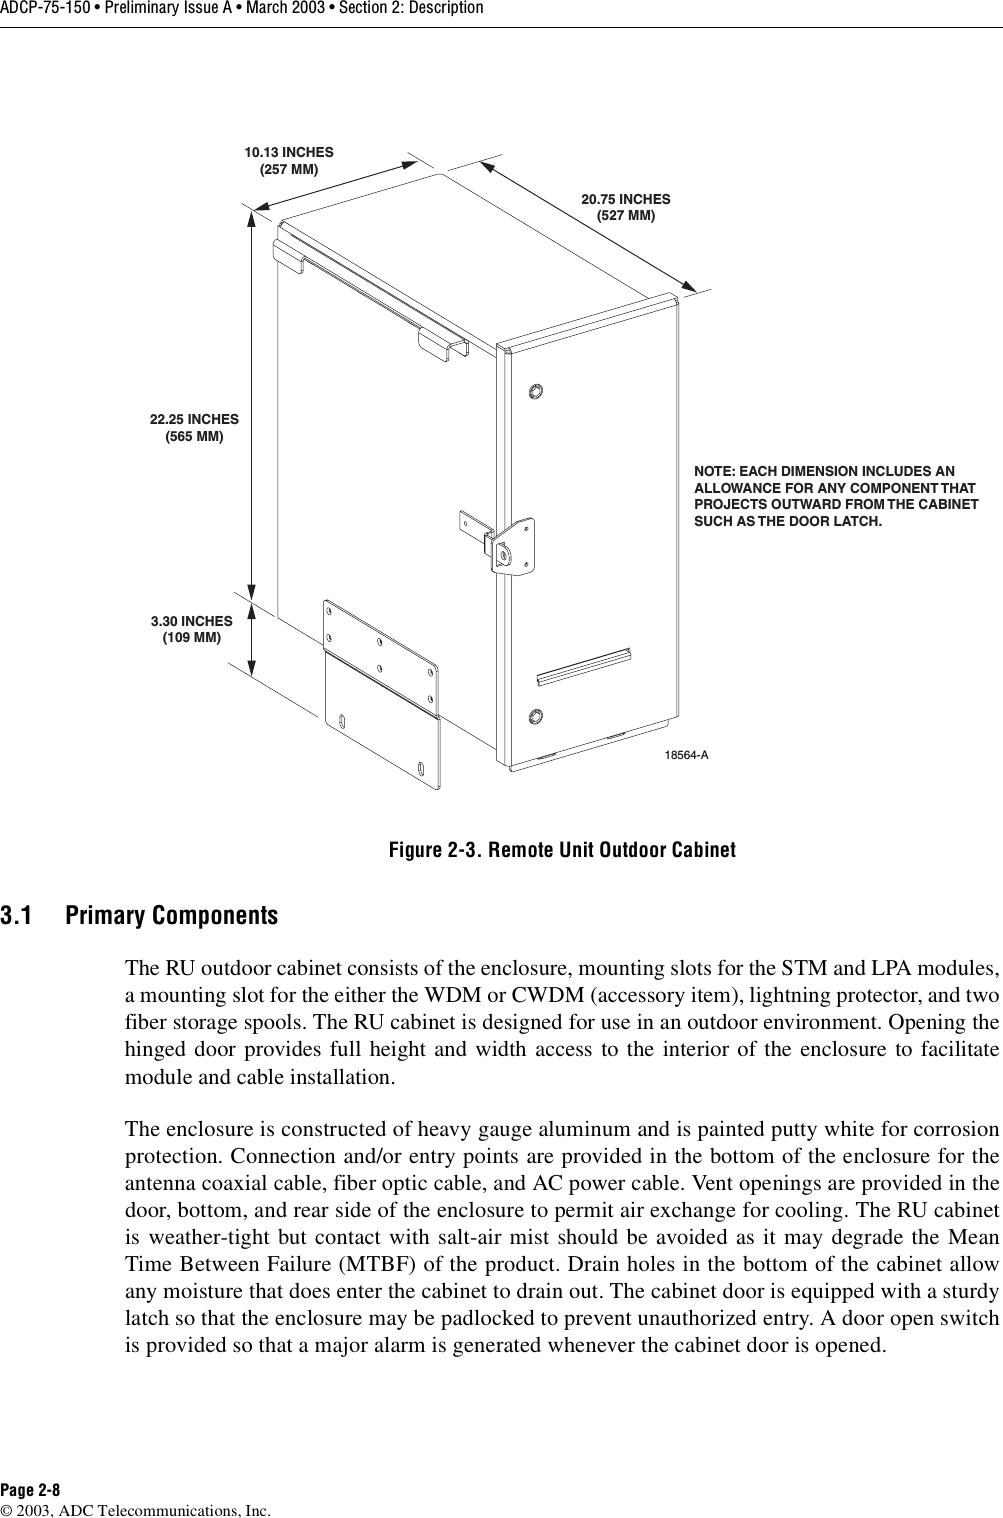 ADCP-75-150 • Preliminary Issue A • March 2003 • Section 2: DescriptionPage 2-8©2003, ADC Telecommunications, Inc.Figure 2-3. Remote Unit Outdoor Cabinet3.1 Primary ComponentsThe RU outdoor cabinet consists of the enclosure, mounting slots for the STM and LPA modules,amounting slot for the either the WDM or CWDM (accessory item), lightning protector, and twofiber storage spools. The RU cabinet is designed for use in an outdoor environment. Opening thehinged door provides full height and width access to the interior of the enclosure to facilitatemodule and cable installation.The enclosure is constructed of heavy gauge aluminum and is painted putty white for corrosionprotection. Connection and/or entry points are provided in the bottom of the enclosure for theantenna coaxial cable, fiber optic cable, and AC power cable. Vent openings are provided in thedoor, bottom, and rear side of the enclosure to permit air exchange for cooling. The RU cabinetis weather-tight but contact with salt-air mist should be avoided as it may degrade the MeanTime Between Failure (MTBF) of the product. Drain holes in the bottom of the cabinet allowany moisture that does enter the cabinet to drain out. The cabinet door is equipped with asturdylatch so that the enclosure may be padlocked to prevent unauthorized entry. Adoor open switchis provided so that amajor alarm is generated whenever the cabinet door is opened.NOTE: EACH DIMENSION INCLUDES ANALLOWANCE FOR ANY COMPONENT THATPROJECTS OUTWARD FROM THE CABINETSUCH AS THE DOOR LATCH. 18564-A3.30 INCHES(109 MM)22.25 INCHES(565 MM)10.13 INCHES(257 MM)20.75 INCHES(527 MM)